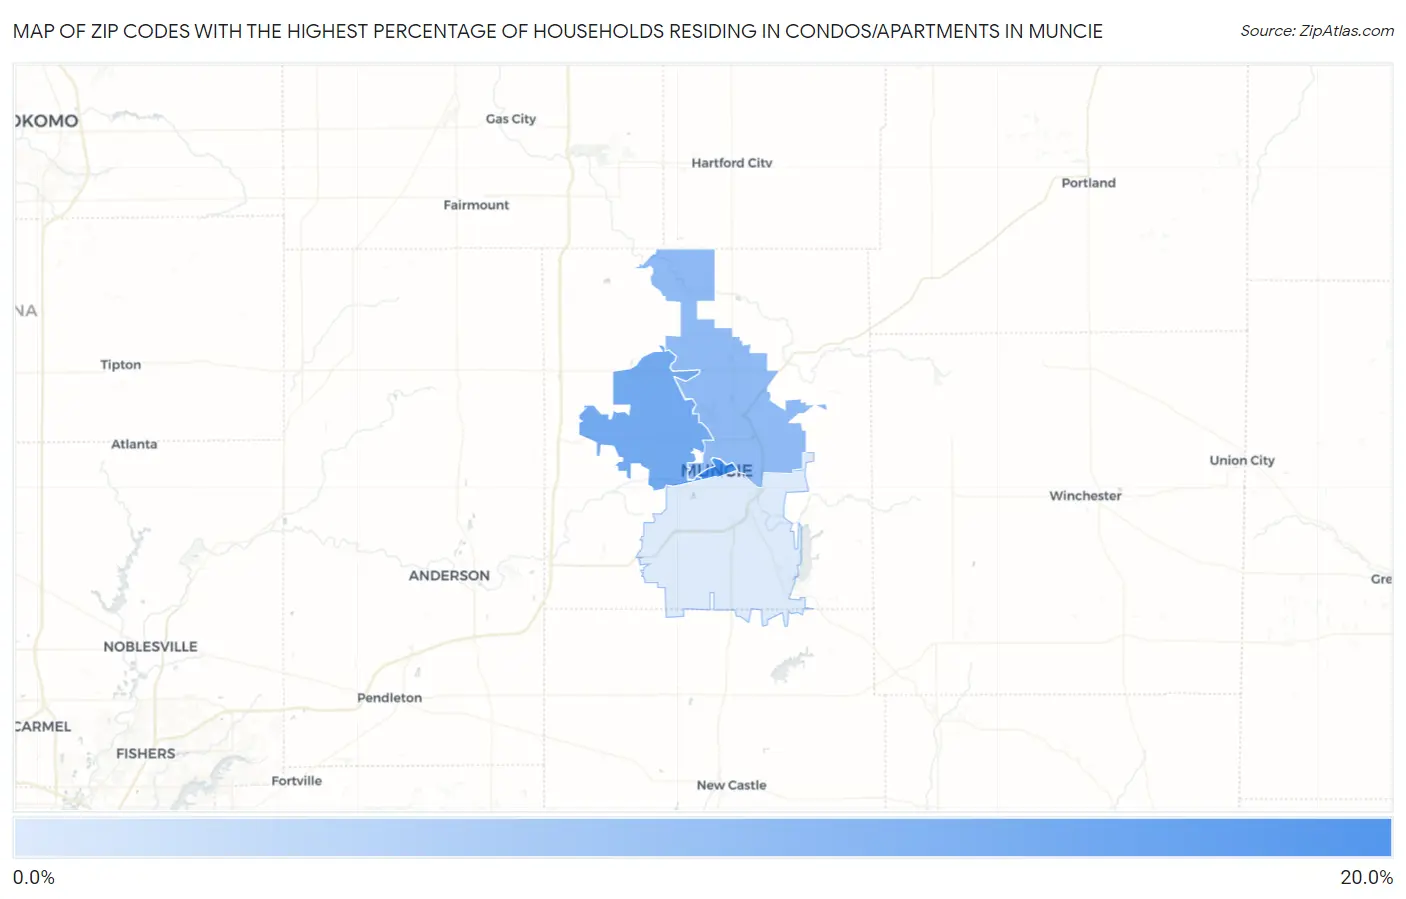 Zip Codes with the Highest Percentage of Households Residing in Condos/Apartments in Muncie Map